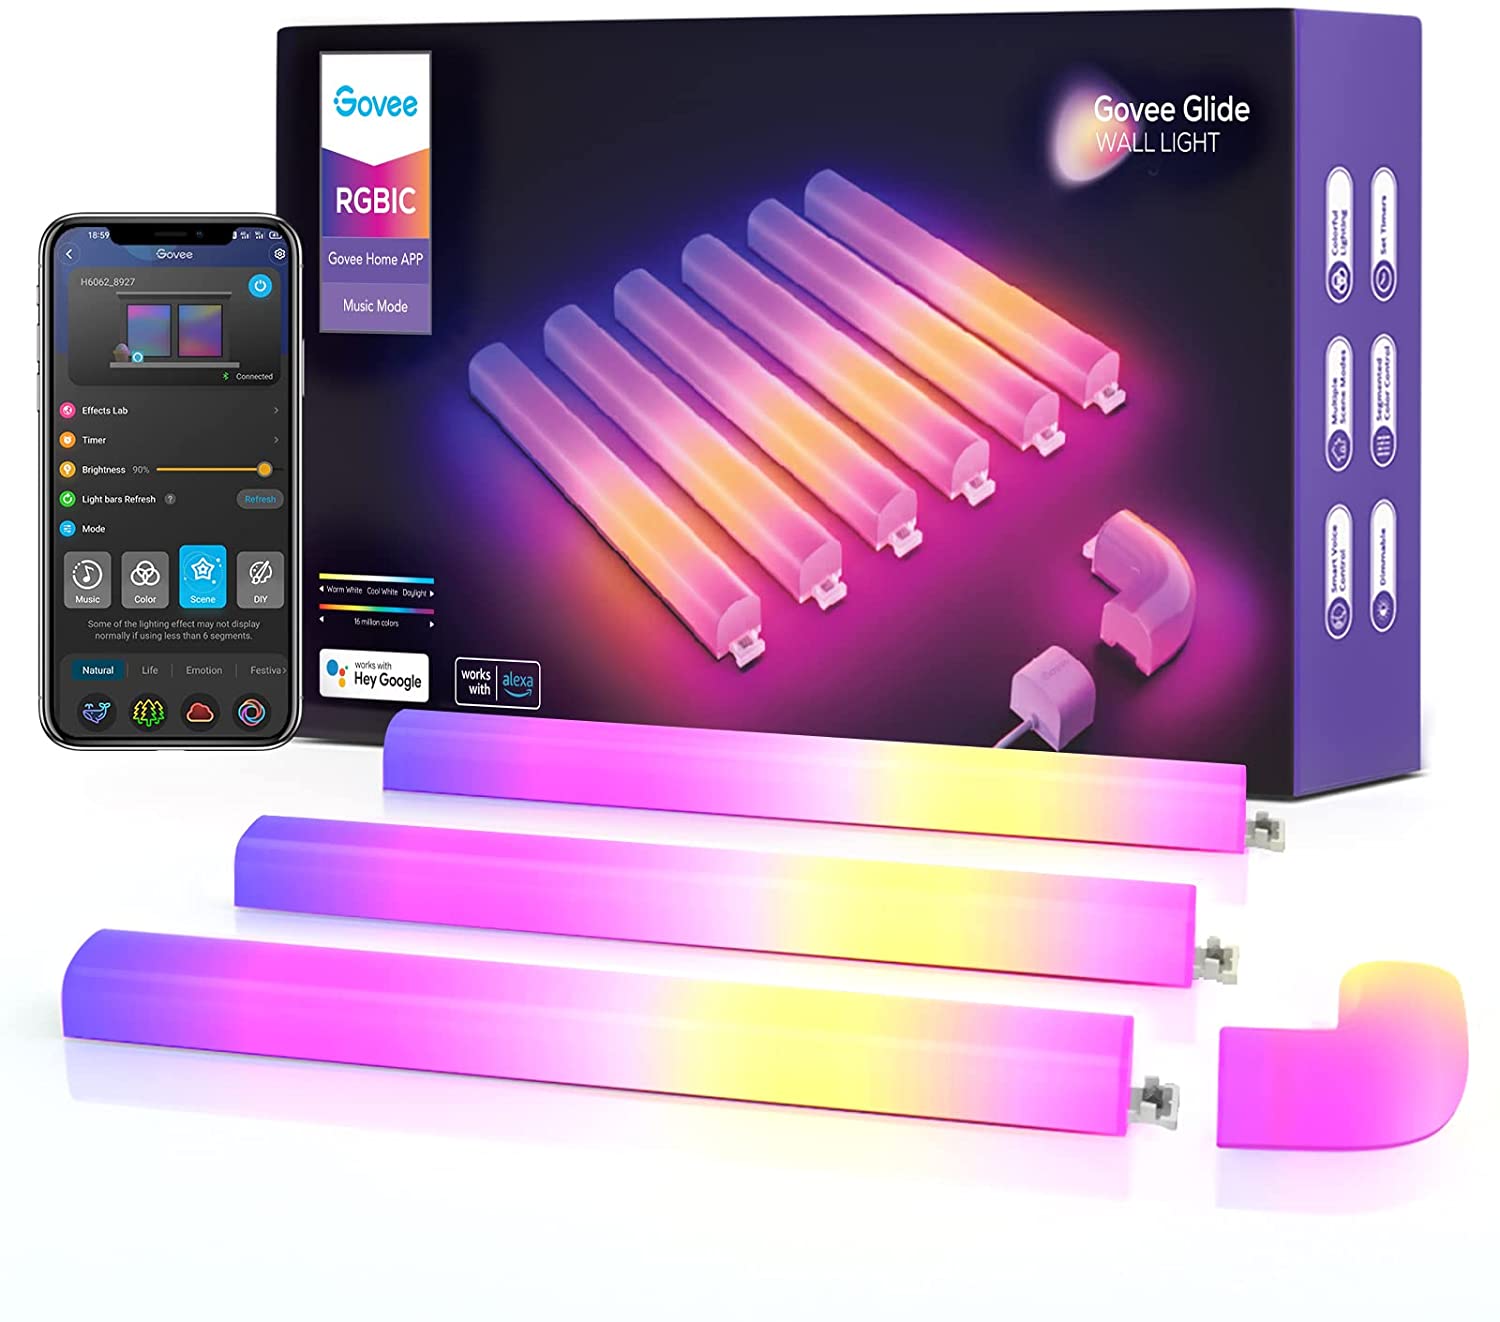 Govee: 37% Off Glide RGBIC Smart Wall Light, Multicolor Customizable, Music Sync Home Decor LED Light Bar with 40+ Dynamic Scenes, Alexa and Google Assistant + FS w/ Prime $62.99